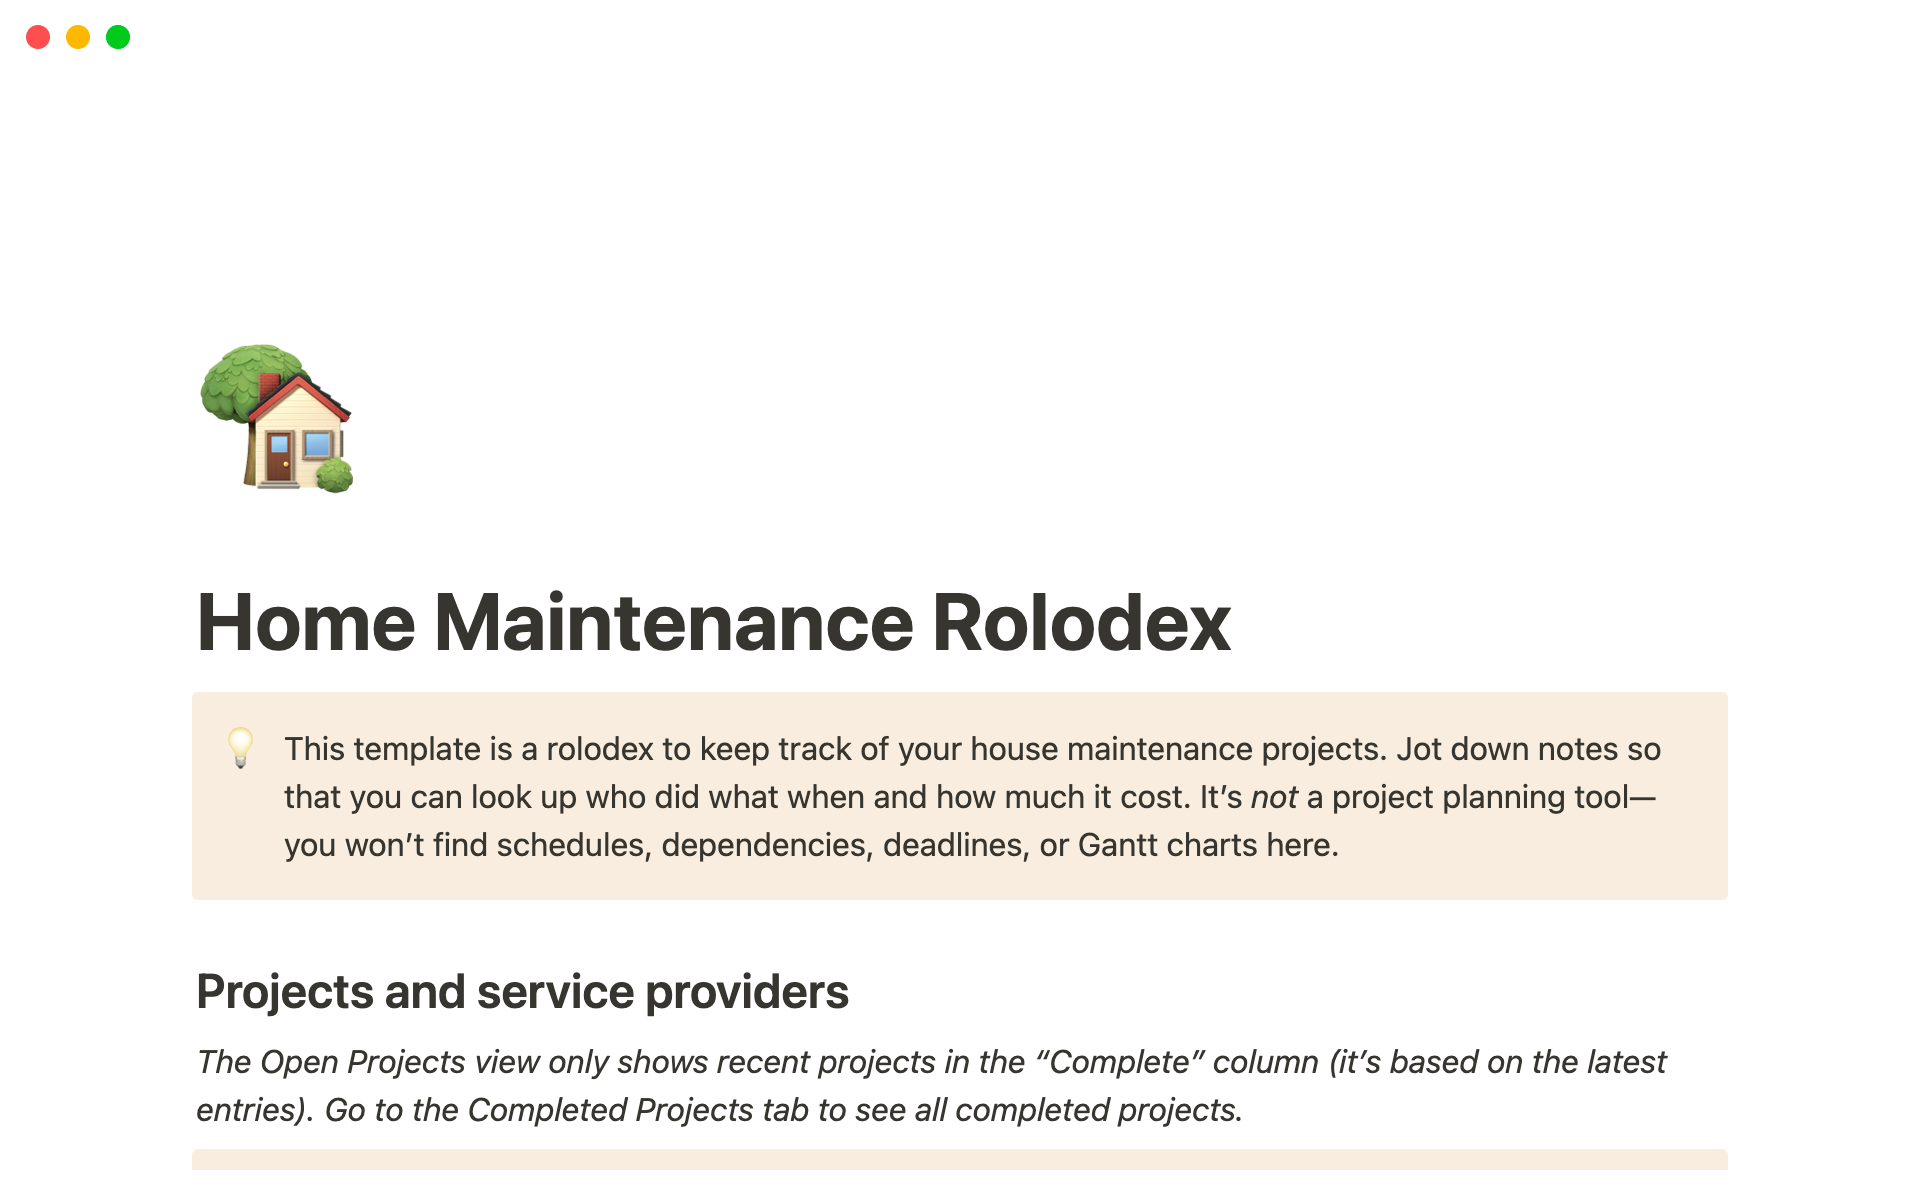 A rolodex to keep track of your house maintenance projects and who did the work.